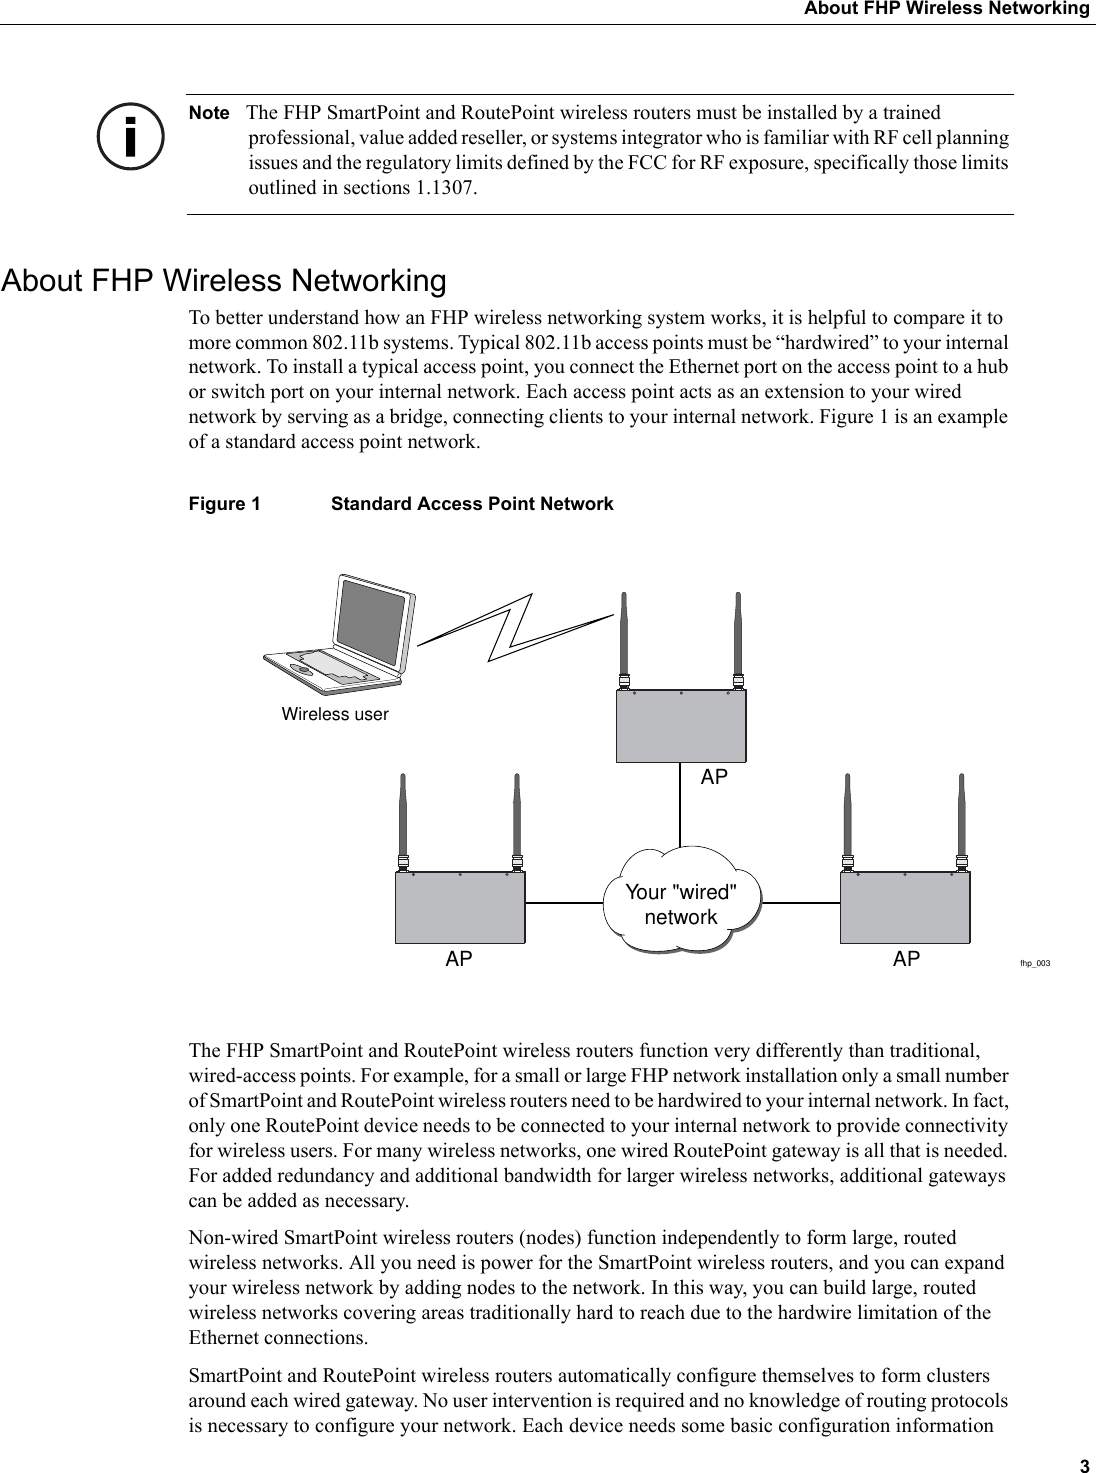  3About FHP Wireless NetworkingNote The FHP SmartPoint and RoutePoint wireless routers must be installed by a trained professional, value added reseller, or systems integrator who is familiar with RF cell planning issues and the regulatory limits defined by the FCC for RF exposure, specifically those limits outlined in sections 1.1307.About FHP Wireless NetworkingTo better understand how an FHP wireless networking system works, it is helpful to compare it to more common 802.11b systems. Typical 802.11b access points must be “hardwired” to your internal network. To install a typical access point, you connect the Ethernet port on the access point to a hub or switch port on your internal network. Each access point acts as an extension to your wired network by serving as a bridge, connecting clients to your internal network. Figure 1 is an example of a standard access point network.Figure 1 Standard Access Point NetworkThe FHP SmartPoint and RoutePoint wireless routers function very differently than traditional, wired-access points. For example, for a small or large FHP network installation only a small number of SmartPoint and RoutePoint wireless routers need to be hardwired to your internal network. In fact, only one RoutePoint device needs to be connected to your internal network to provide connectivity for wireless users. For many wireless networks, one wired RoutePoint gateway is all that is needed. For added redundancy and additional bandwidth for larger wireless networks, additional gateways can be added as necessary. Non-wired SmartPoint wireless routers (nodes) function independently to form large, routed wireless networks. All you need is power for the SmartPoint wireless routers, and you can expand your wireless network by adding nodes to the network. In this way, you can build large, routed wireless networks covering areas traditionally hard to reach due to the hardwire limitation of the Ethernet connections. SmartPoint and RoutePoint wireless routers automatically configure themselves to form clusters around each wired gateway. No user intervention is required and no knowledge of routing protocols is necessary to configure your network. Each device needs some basic configuration information fhp_003Wireless userAP APAPYour &quot;wired&quot;network